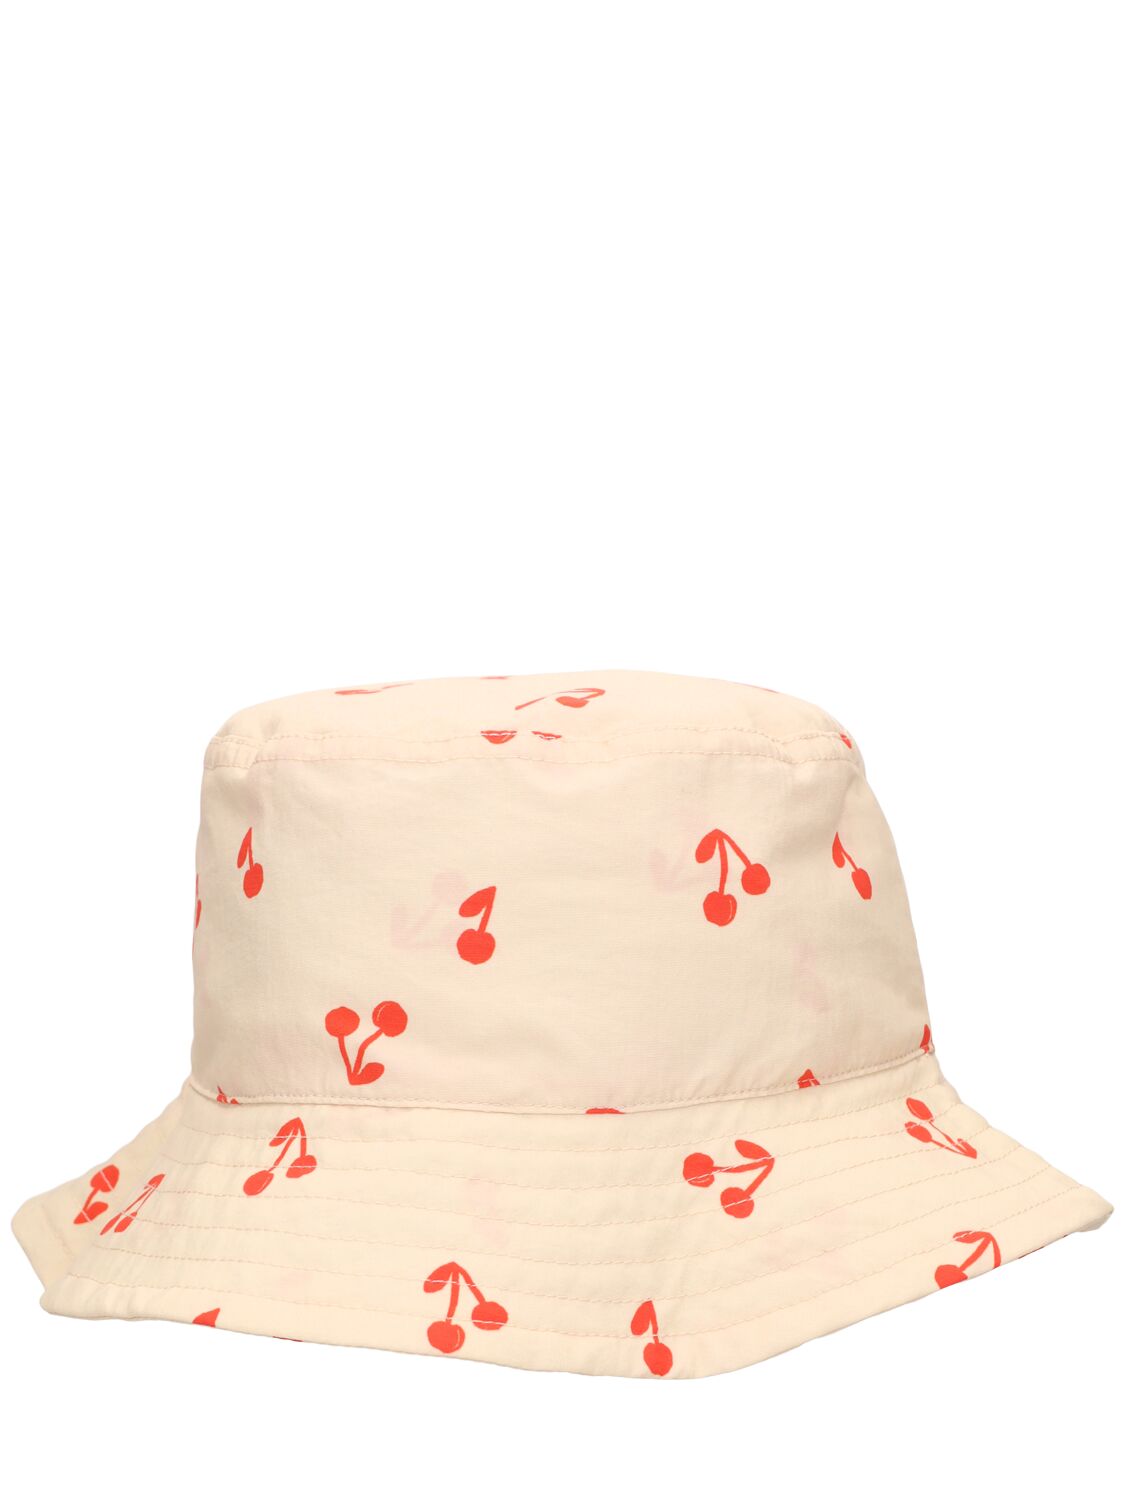 Liewood Kids' Cherry Print Recycled Nylon Bucket Hat In Pink